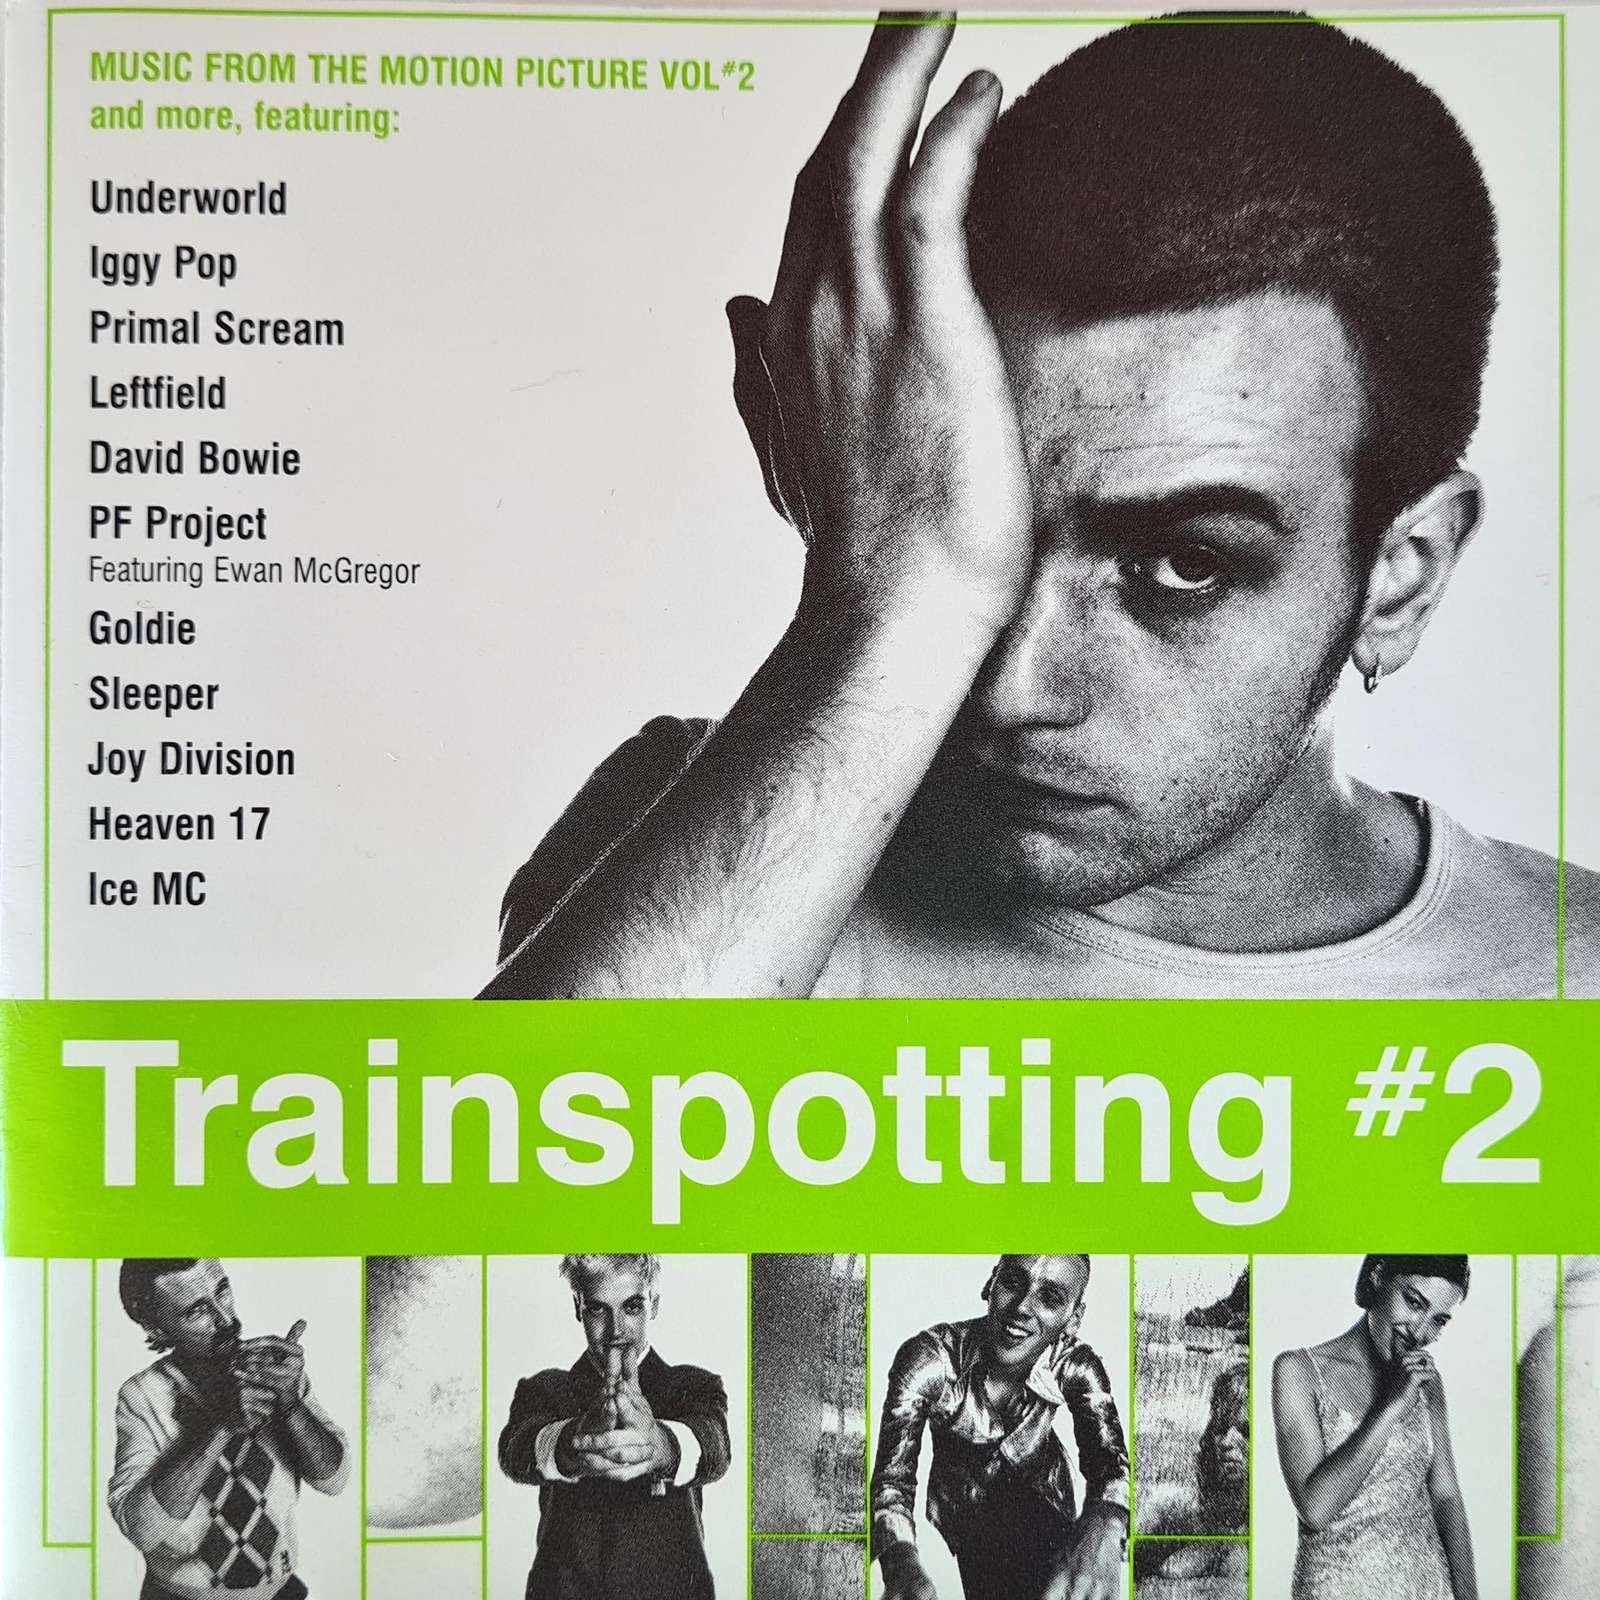 Trainspotting #2 - Music from the Motion Picture Vol 2 (CD)